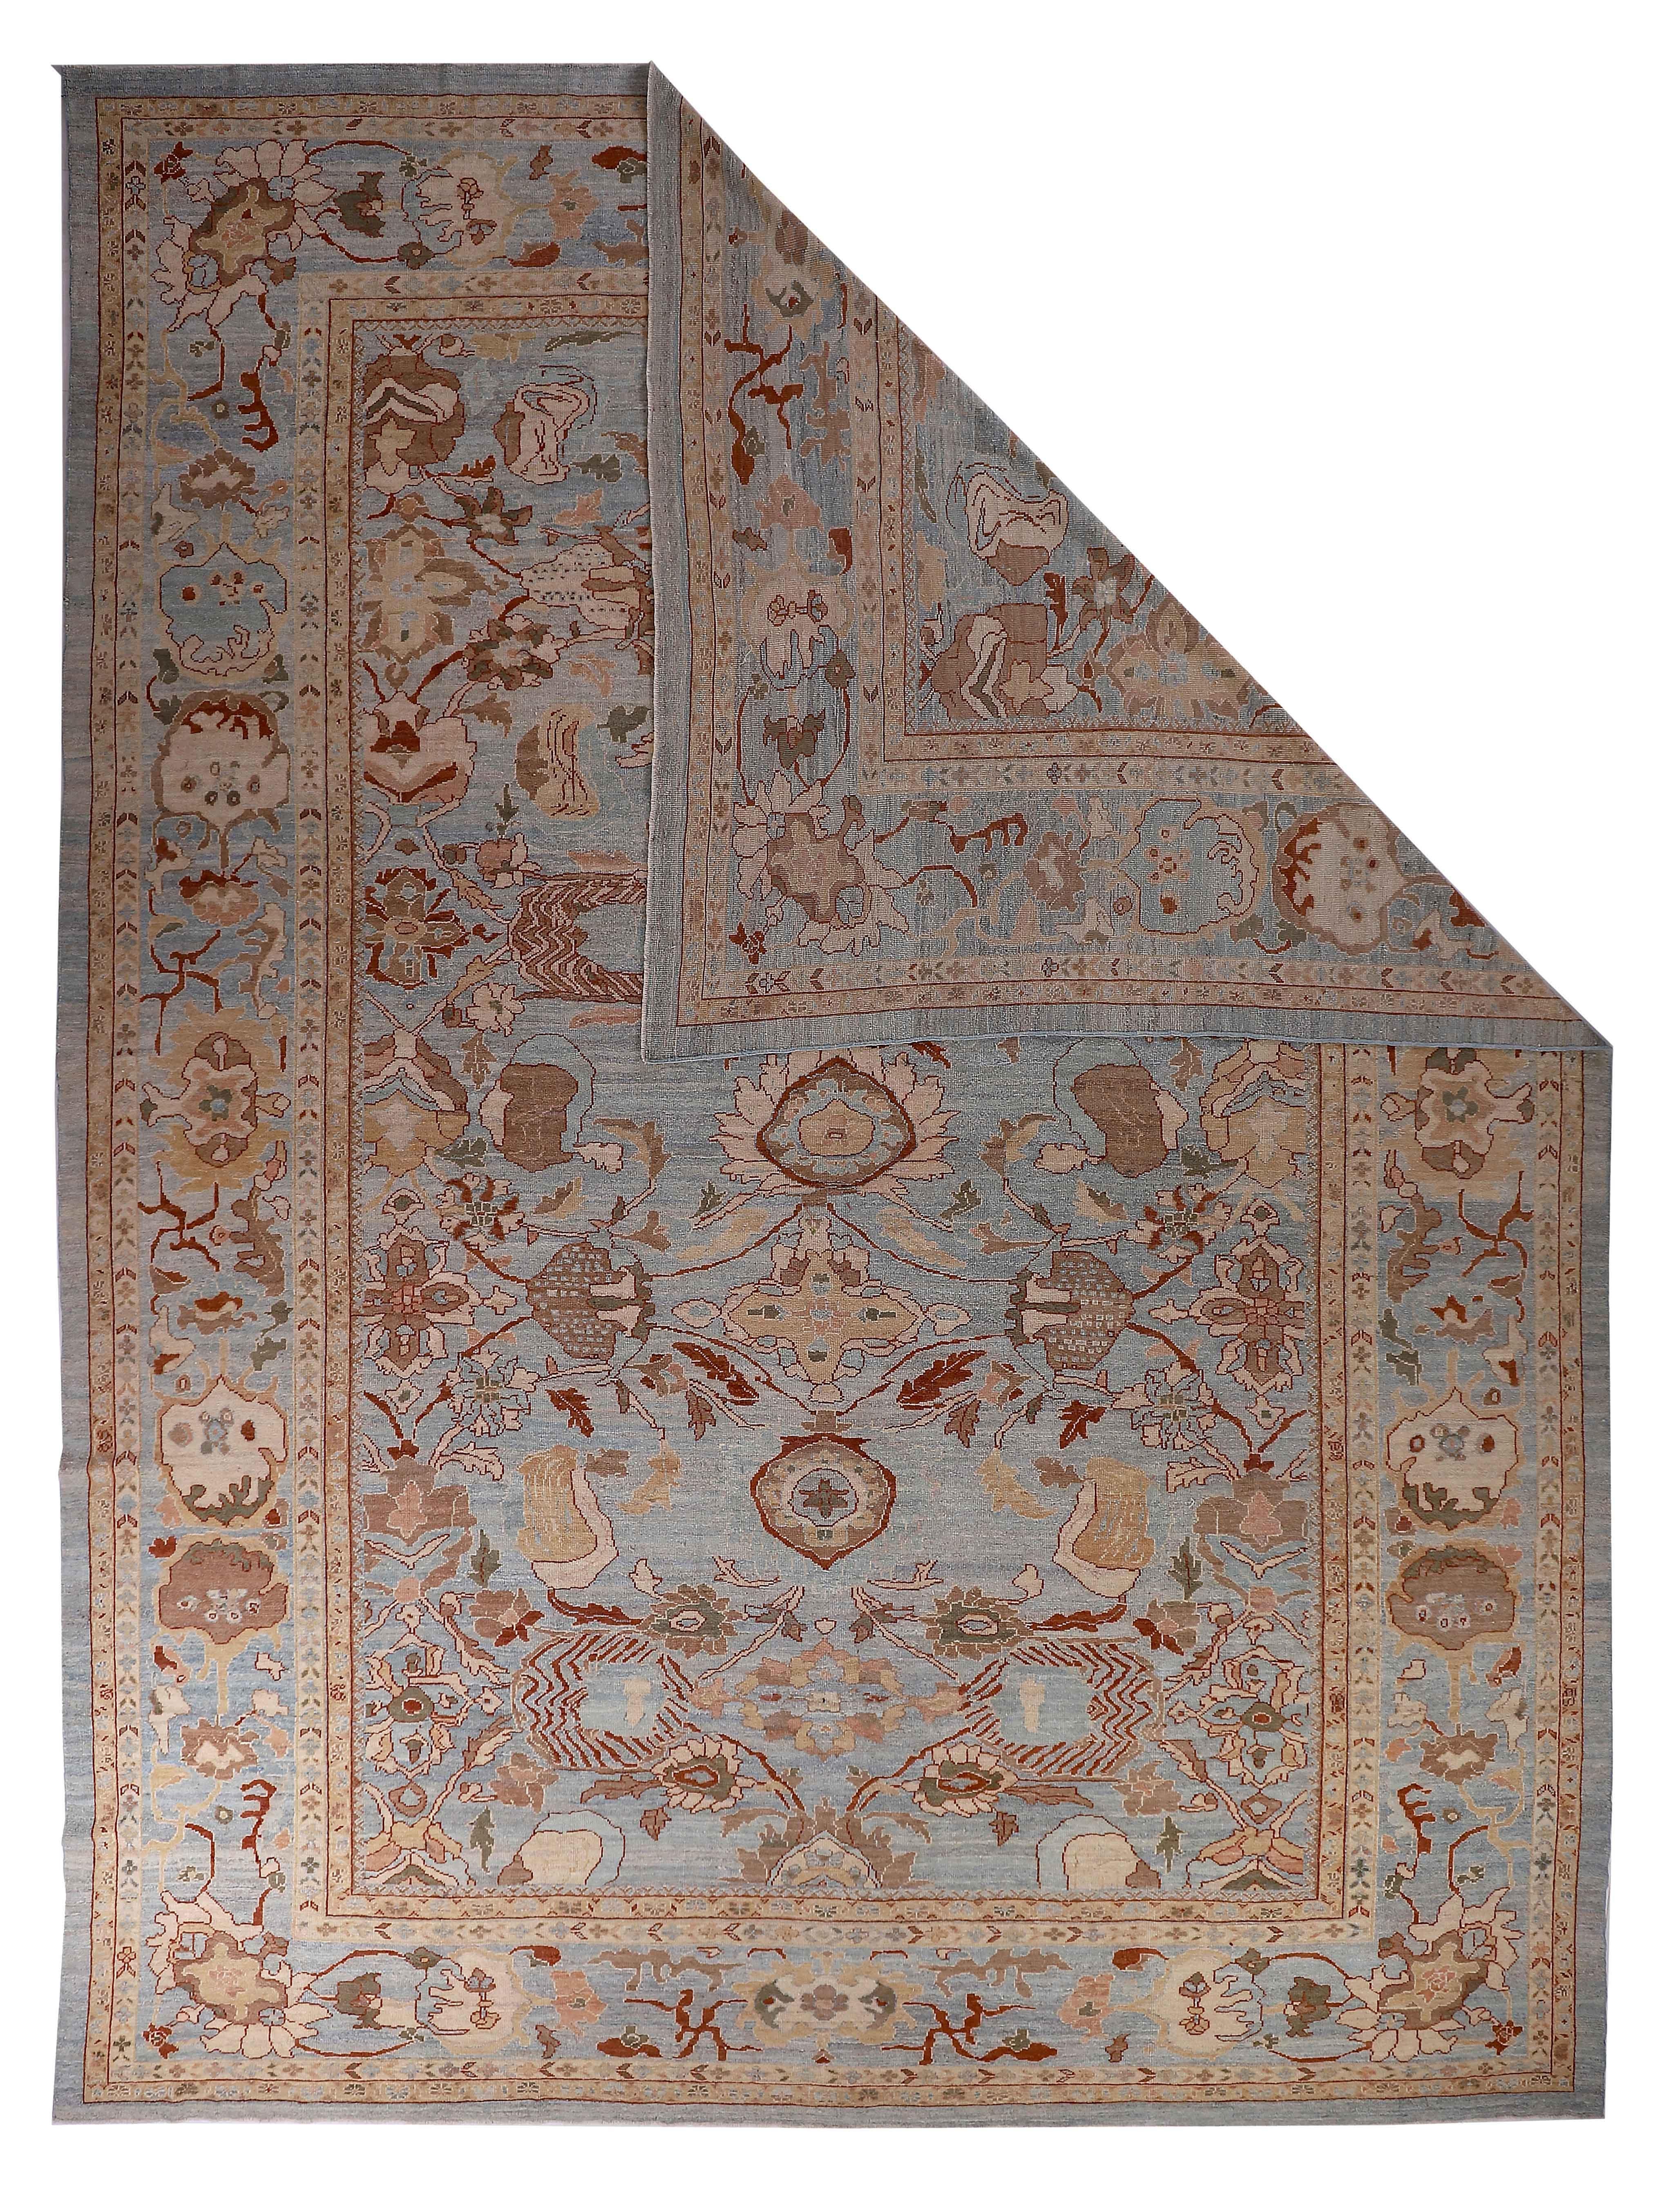 Large Persian Oushak Style Rug with Beige & Brown Floral Patterns on Blue Field For Sale 3